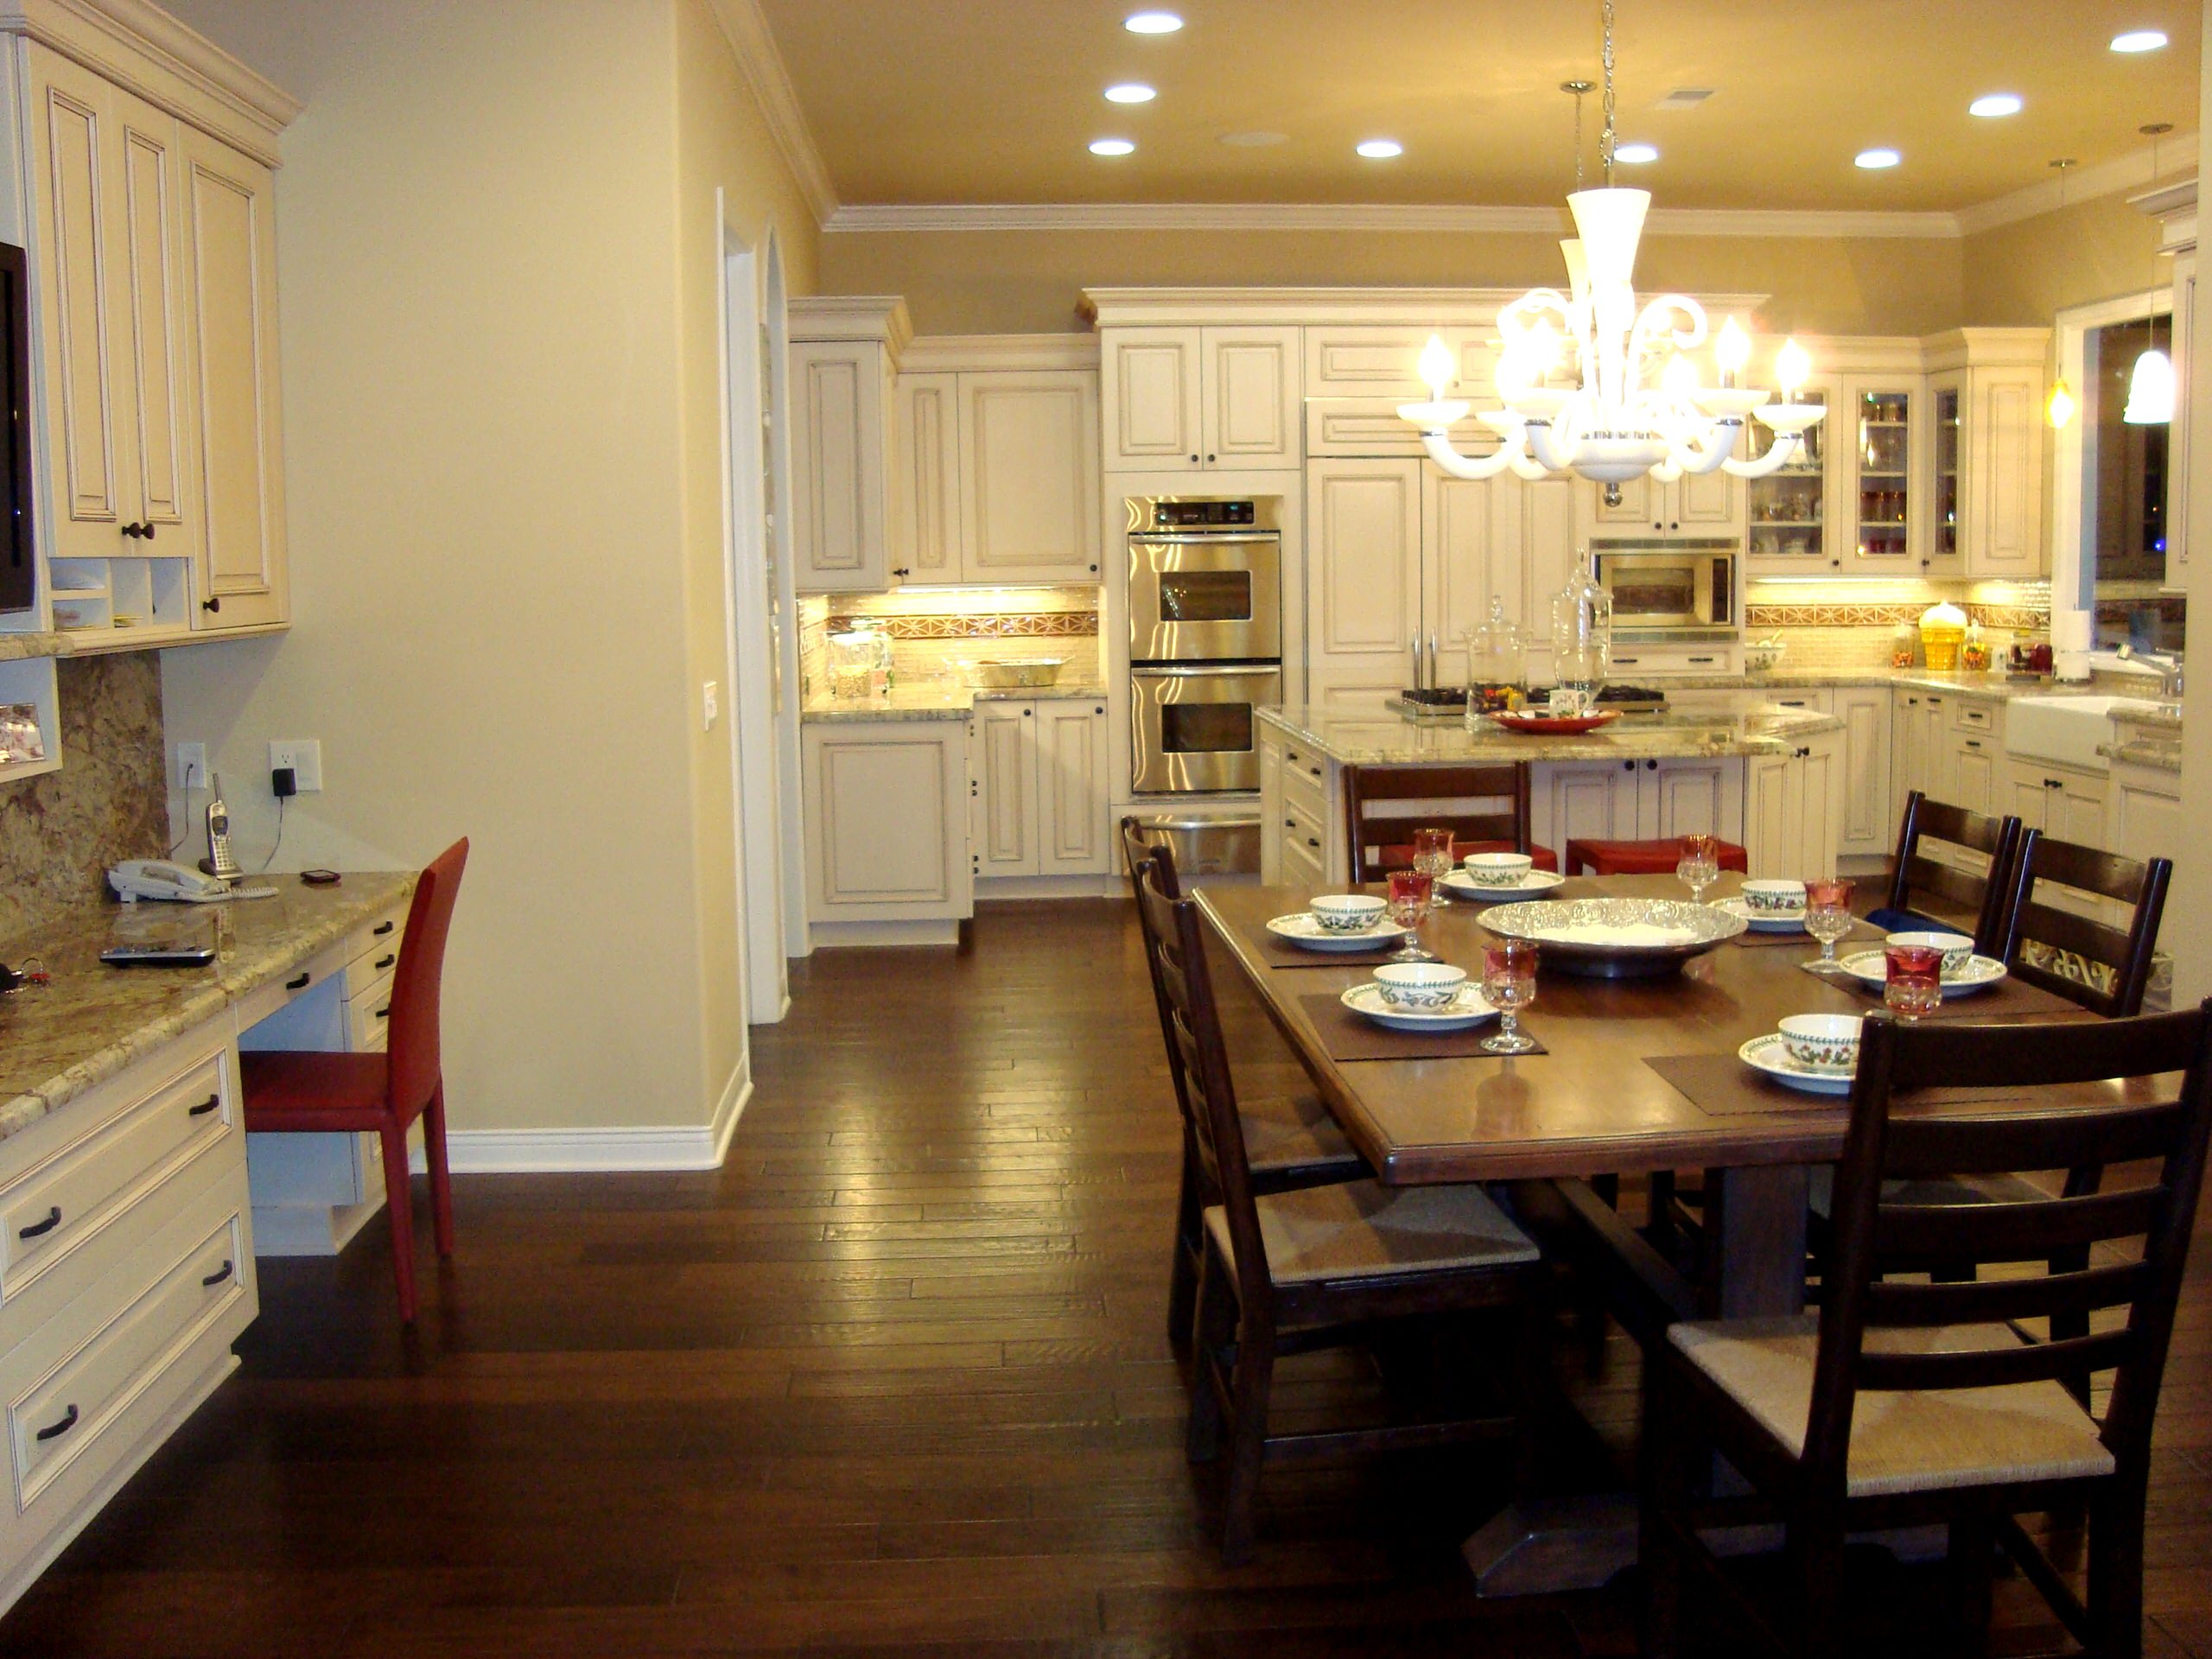 The Nolan Kitchen In Brookhaven Cabinetry, and adjacent desk/office area.